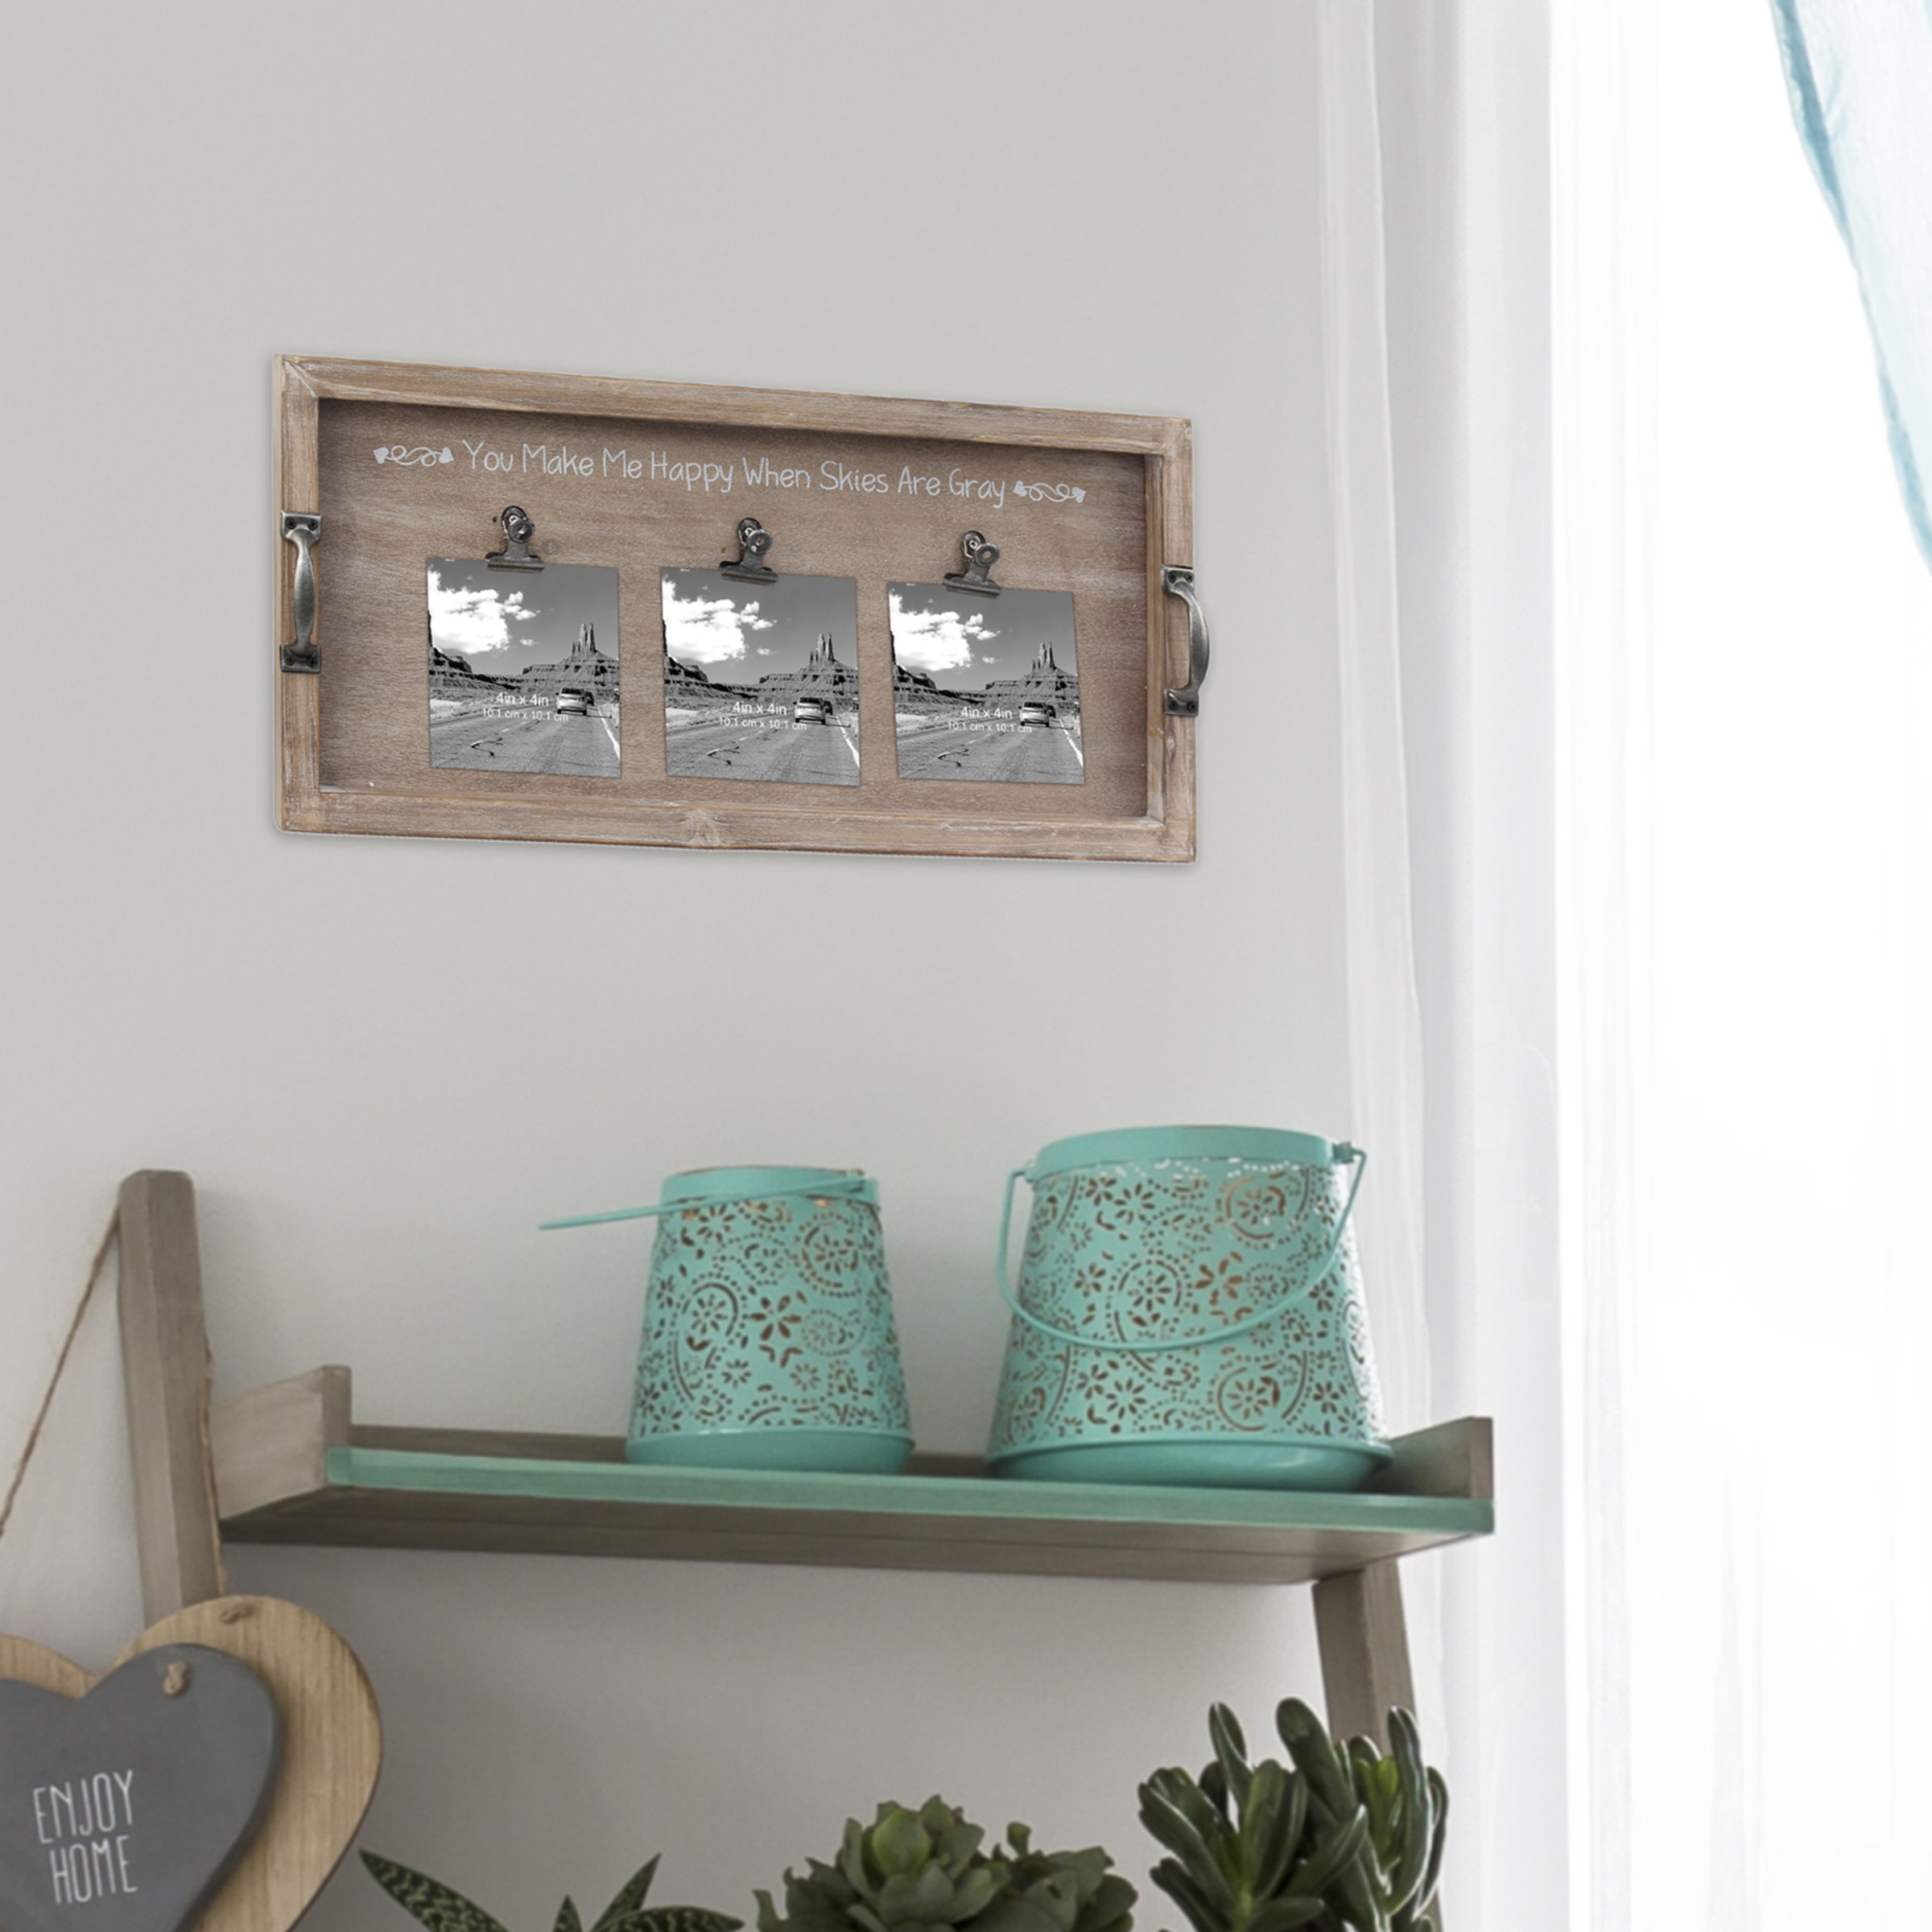 The wall hanging above a shelf